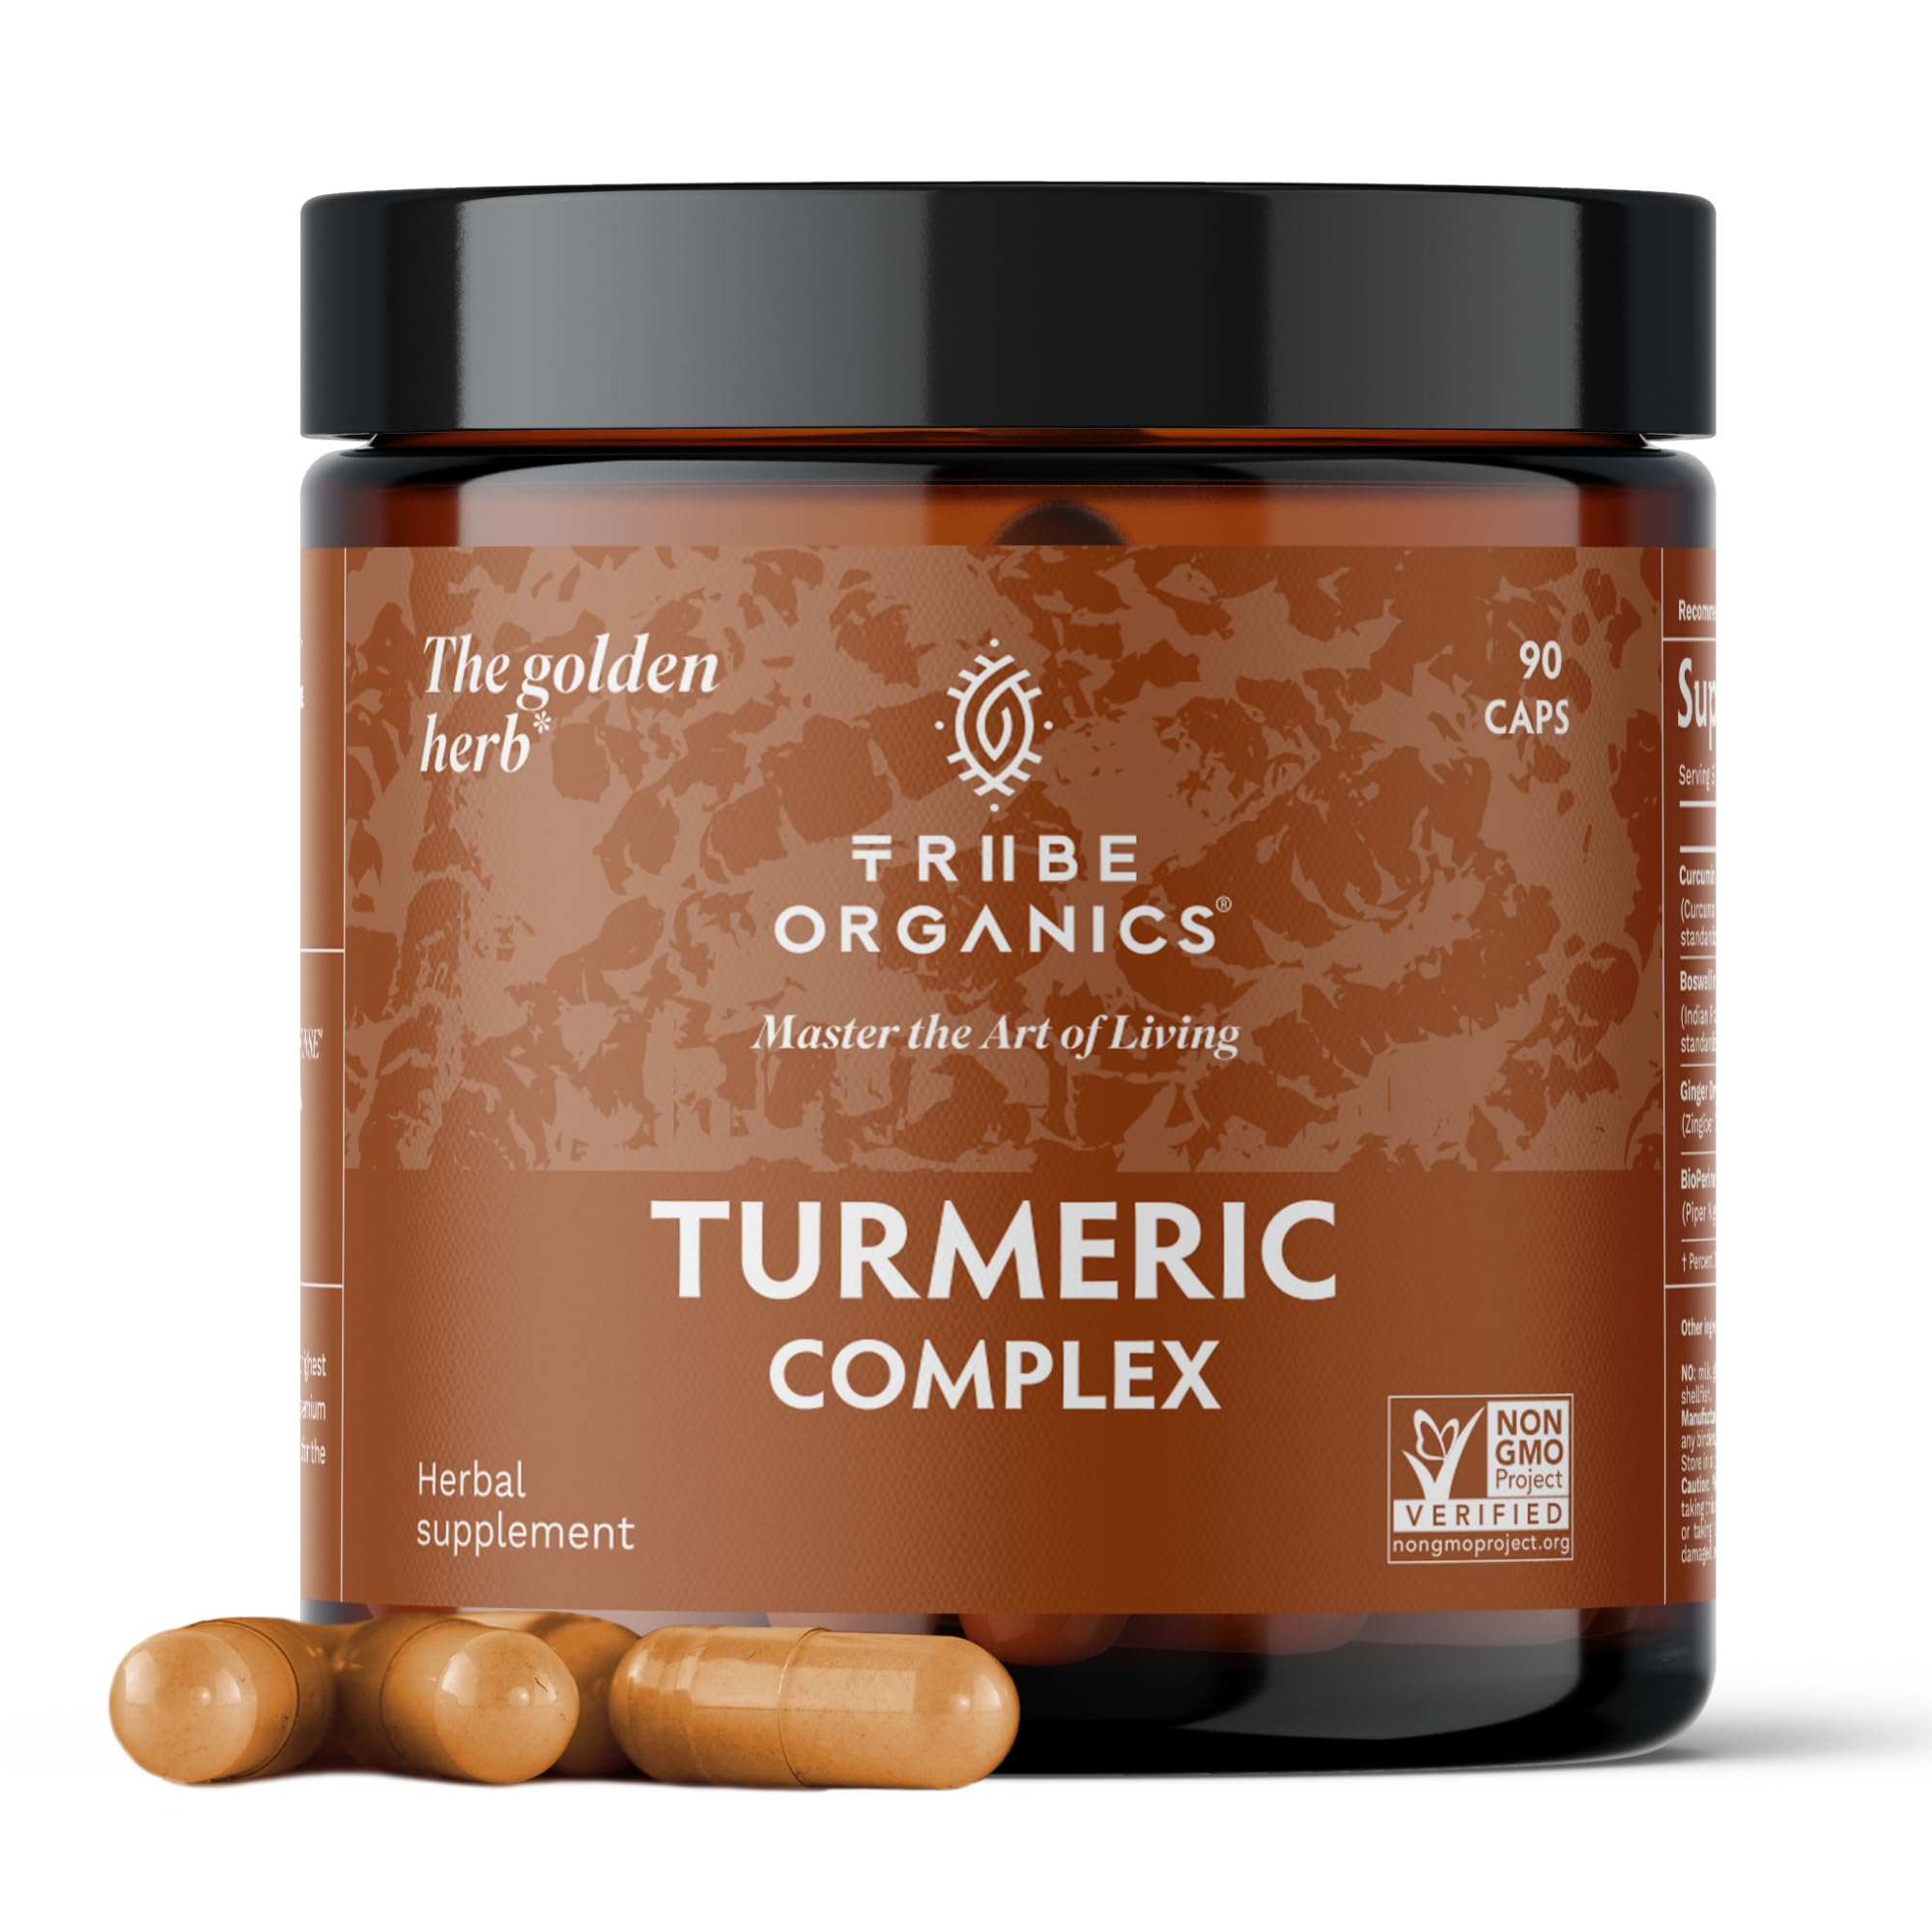 Turmeric Curcumin C3 Complex with BioPerine 1050mg - Natural Joint Support - 95% Curcuminoids & Black Pepper Extract for Ultra High Absorption & Potency - Non GMO - Gluten Free - 90 Vegan Capsules